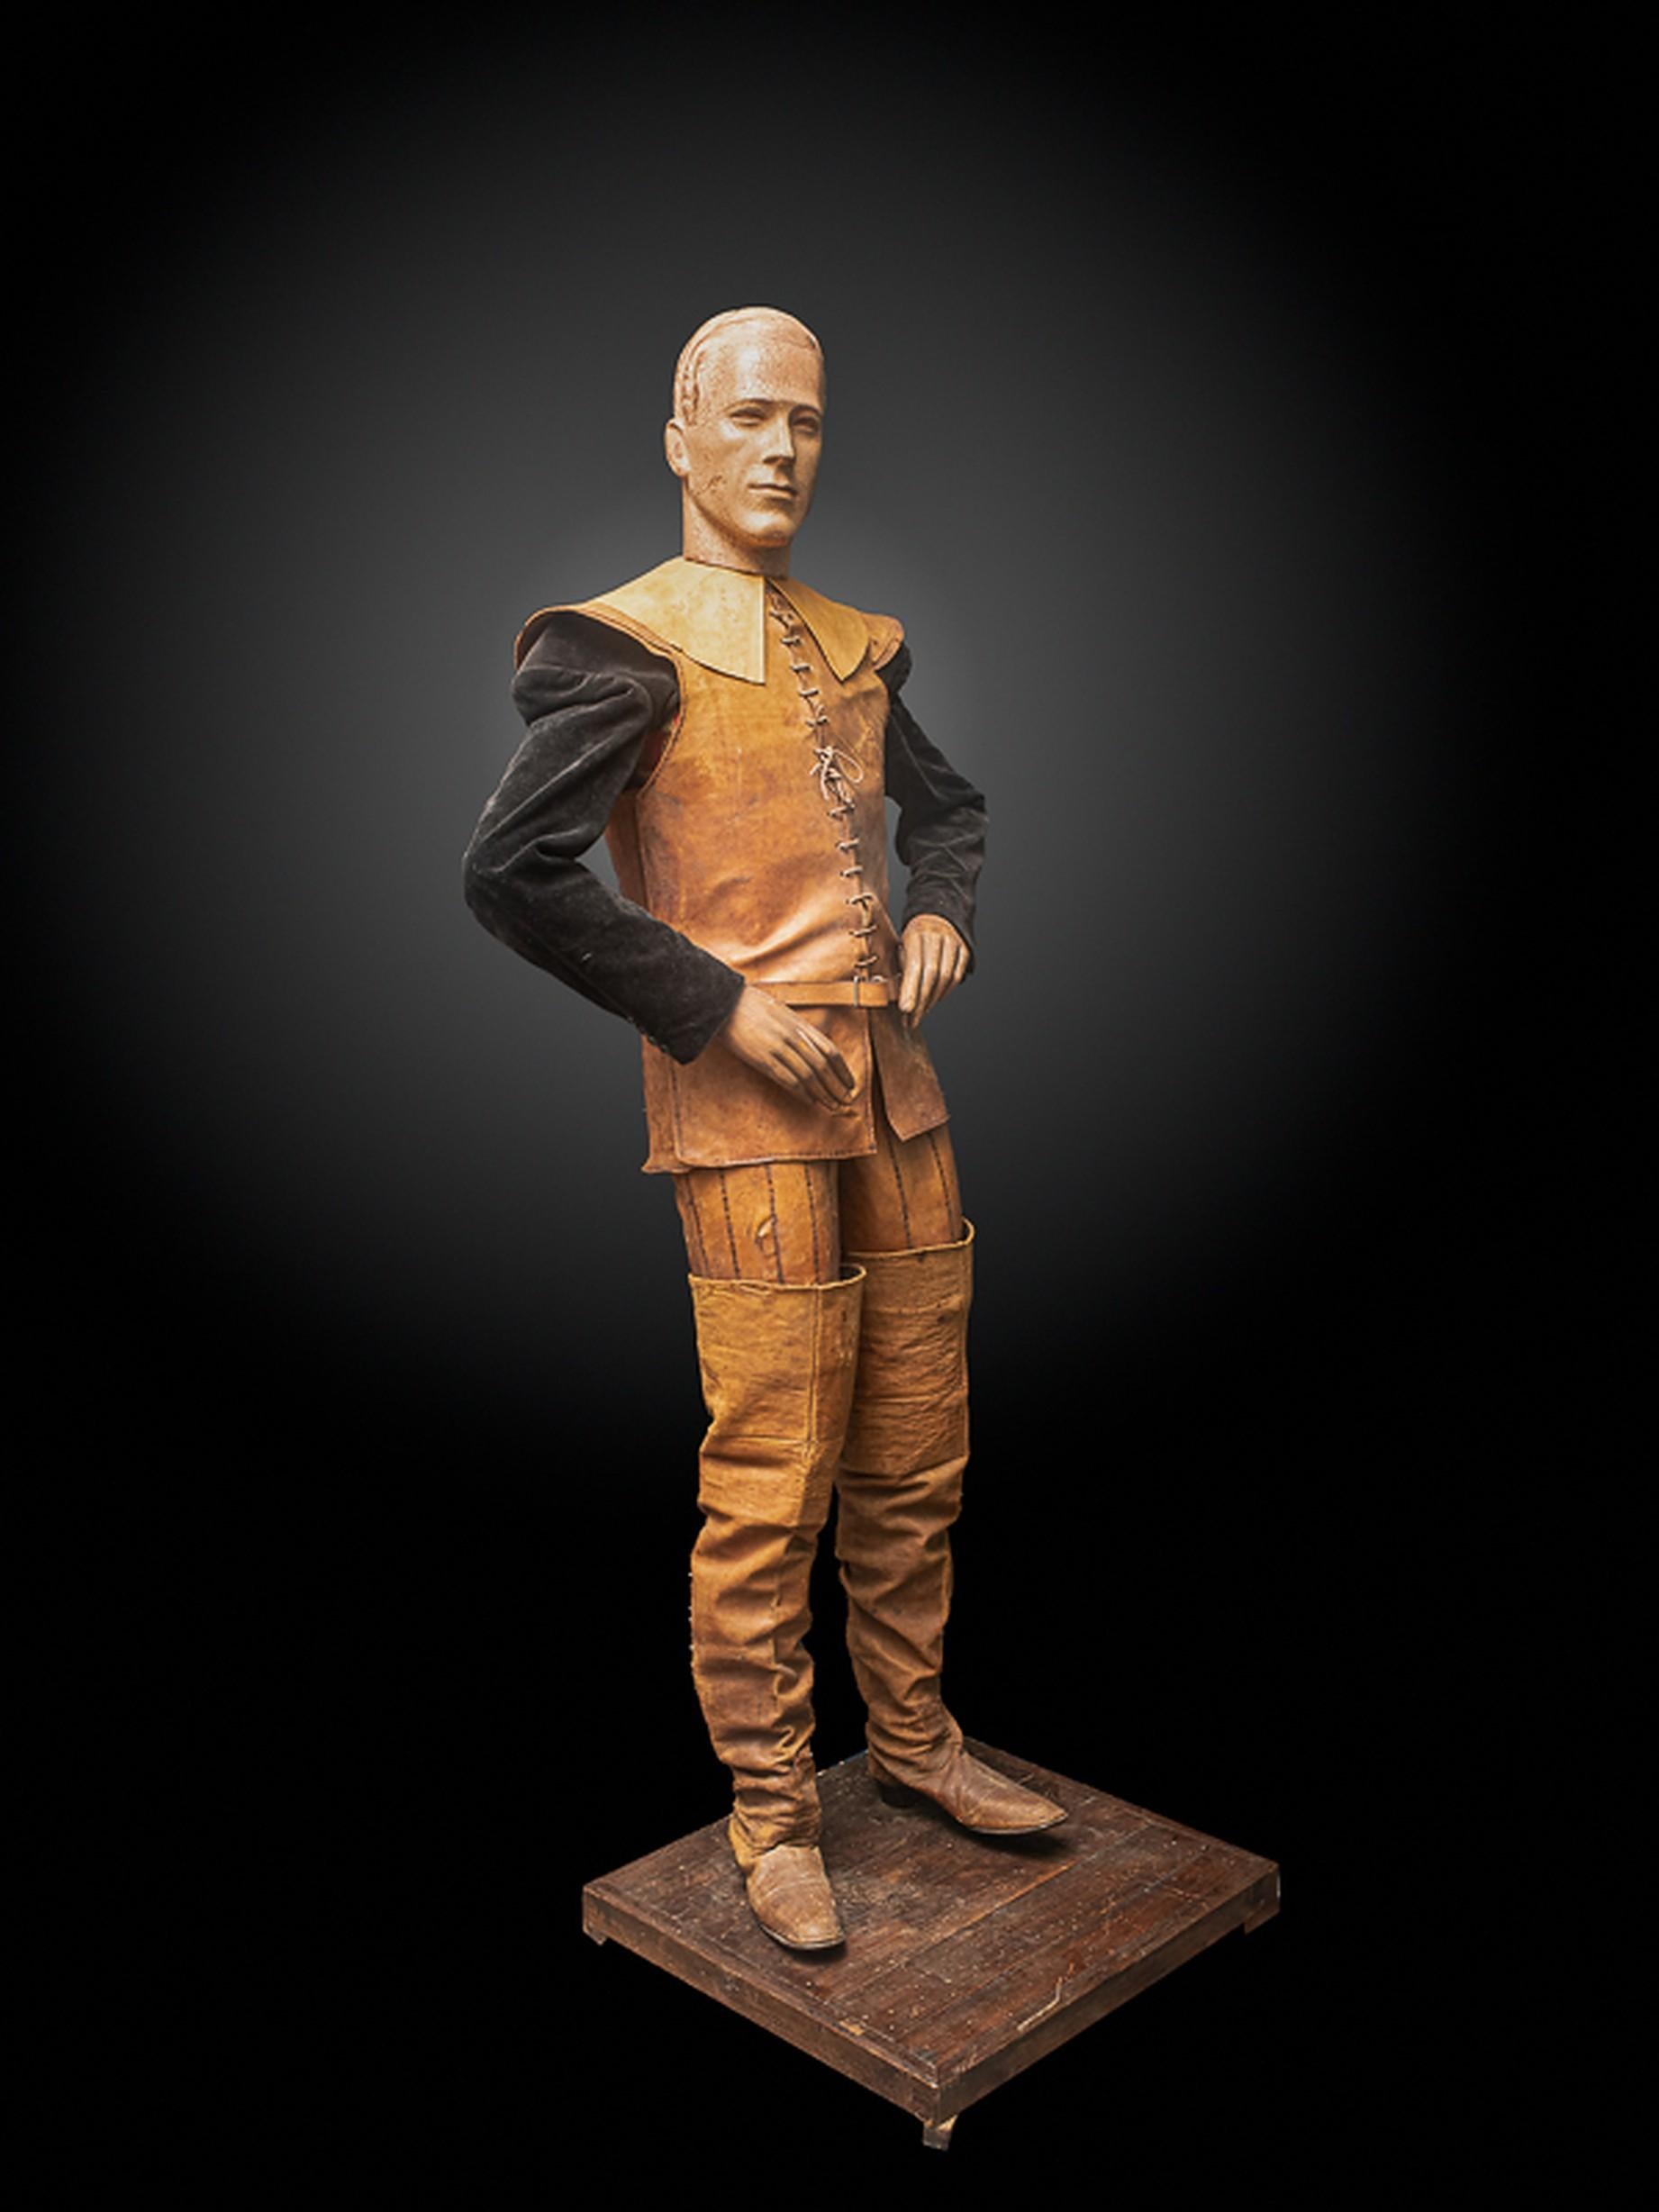 The mannequin is fully dressed in a leather jacket, trousers, boots and a velvet shirt. It is detachable from its wooden pedestal.